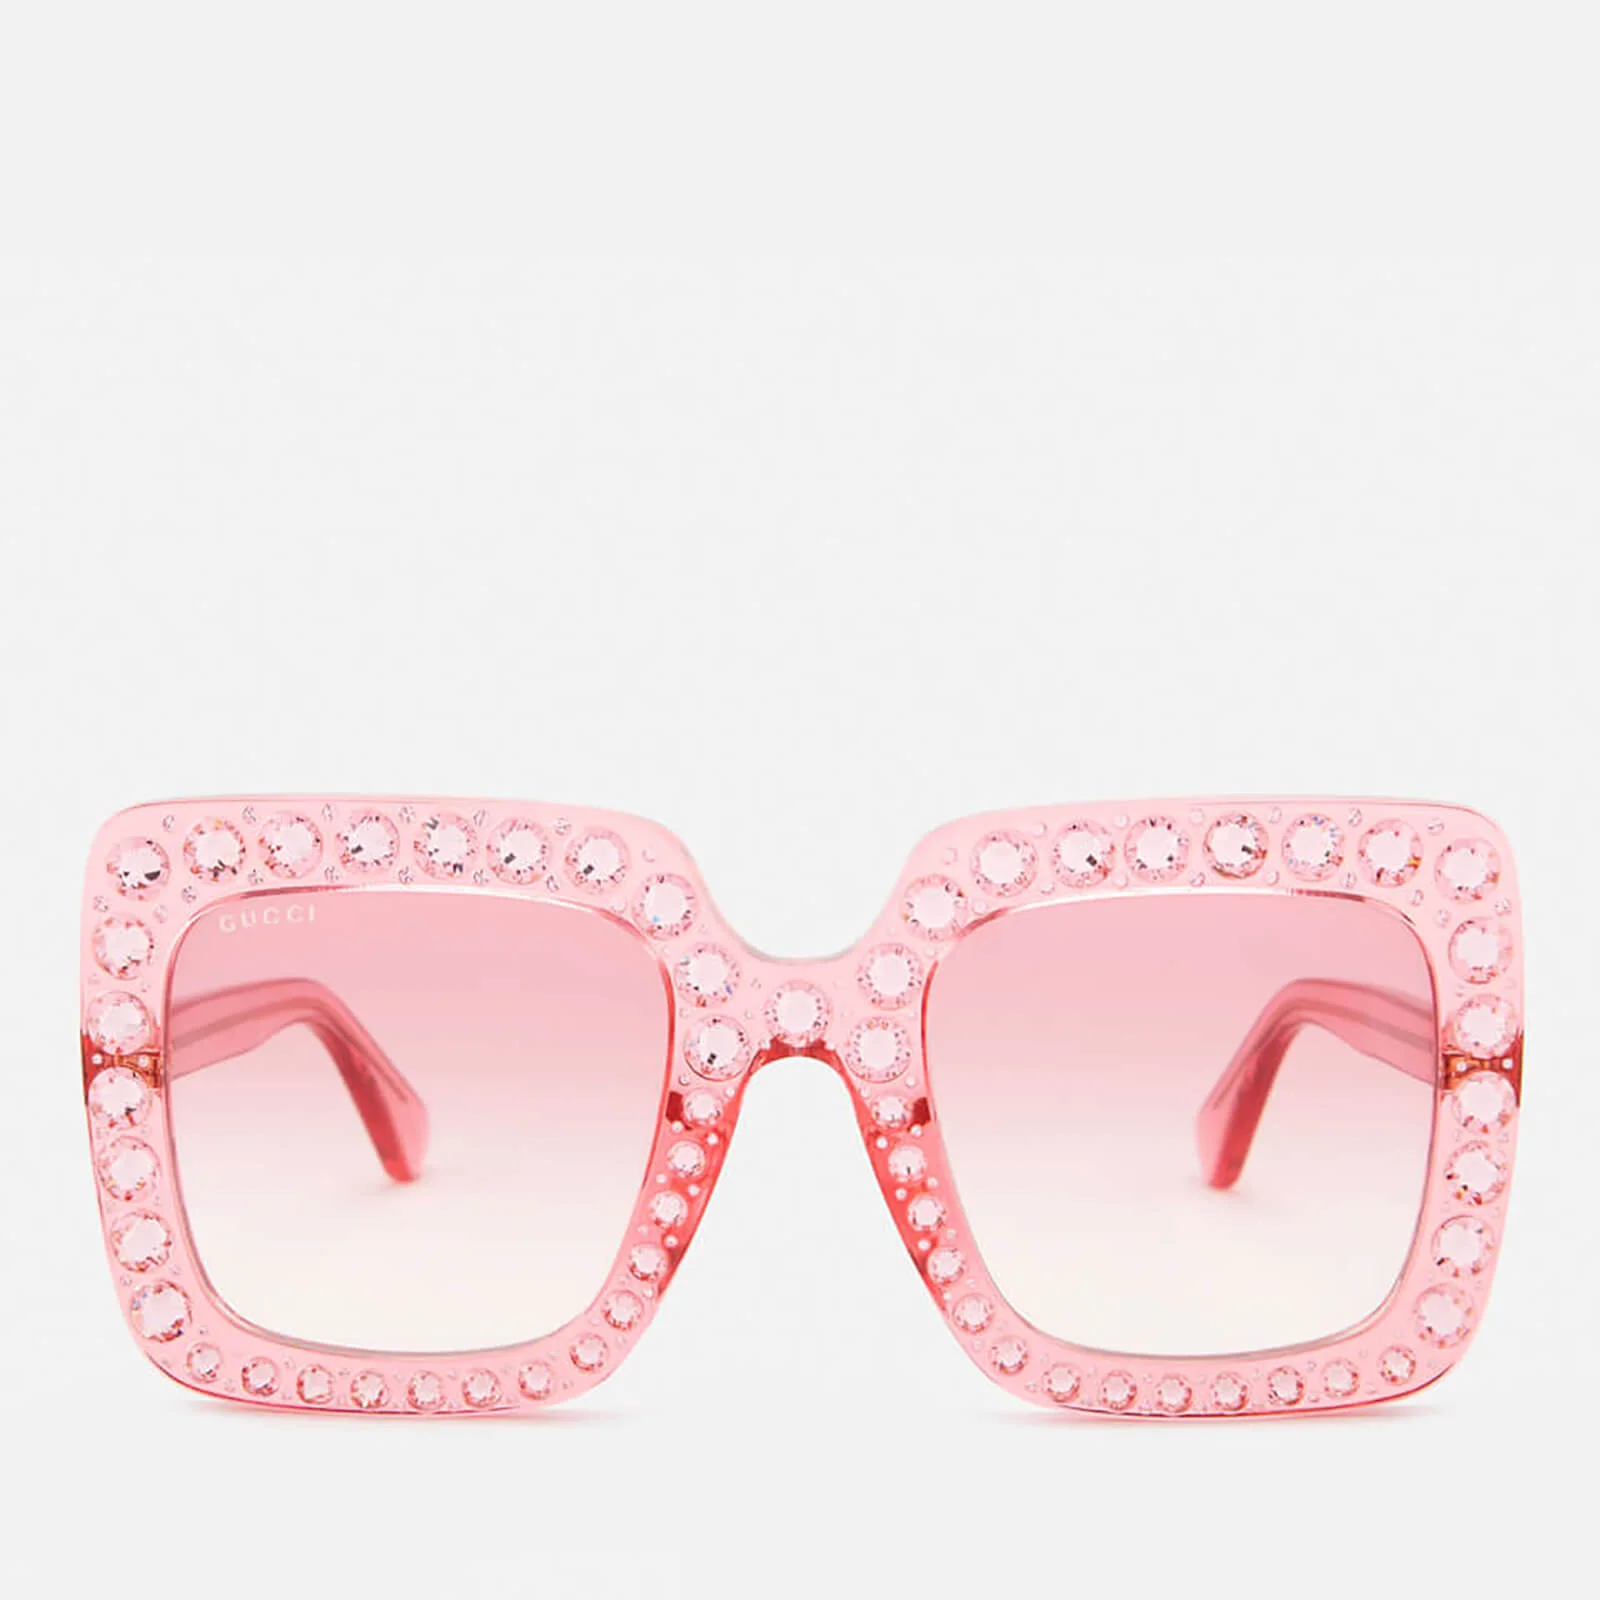 Gucci Women's Large Square Frame Sunglasses - Pink Image 1